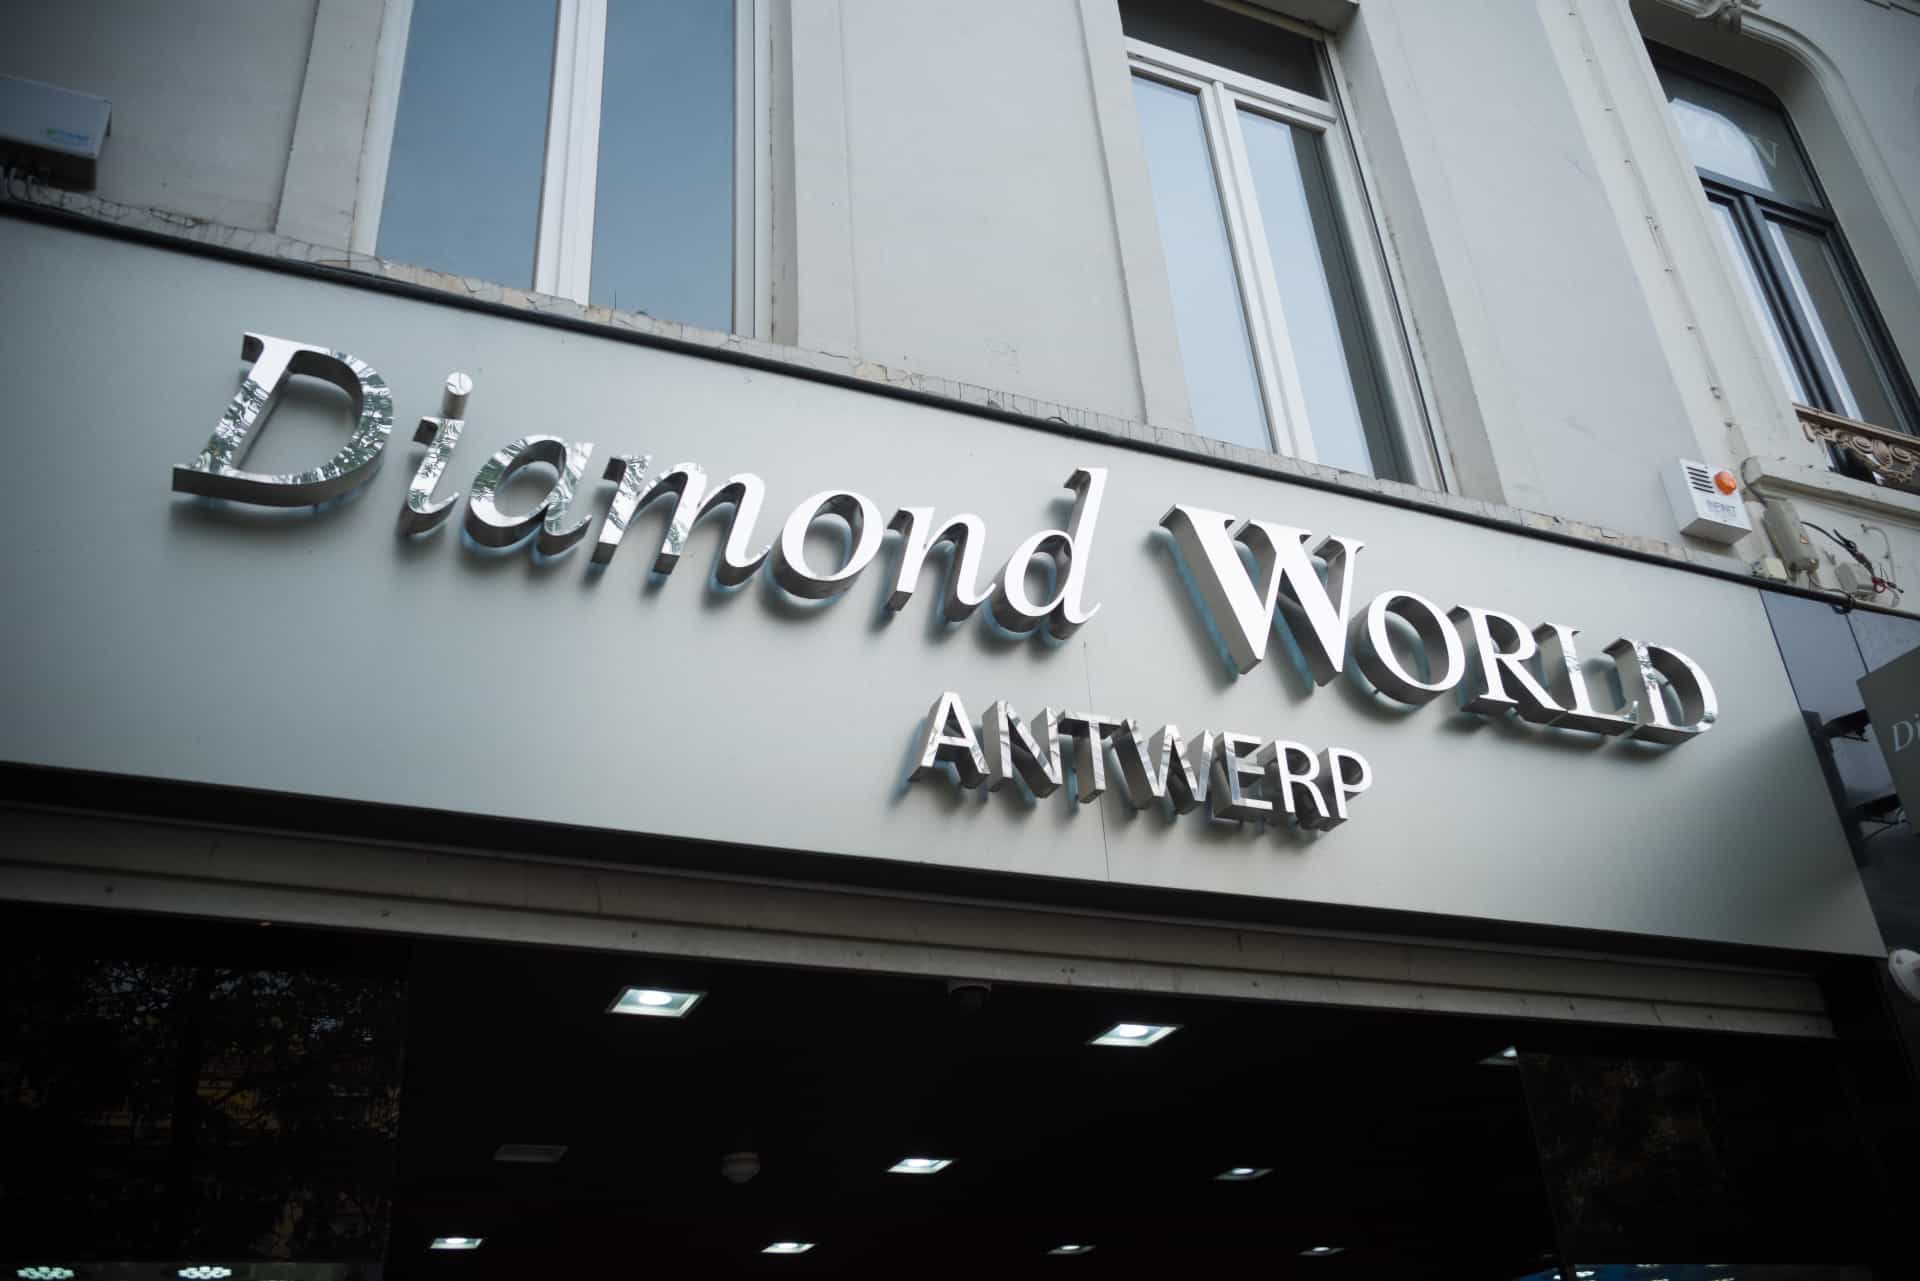 Did you know that 84% of the world's mined diamonds and 50% of all cut diamonds were traded in Antwerp? The city is the center of the world diamond trade, and also the oldest diamond center in Europe. Unsurprisingly, walking through Antwerp's diamond district is pretty impressive!